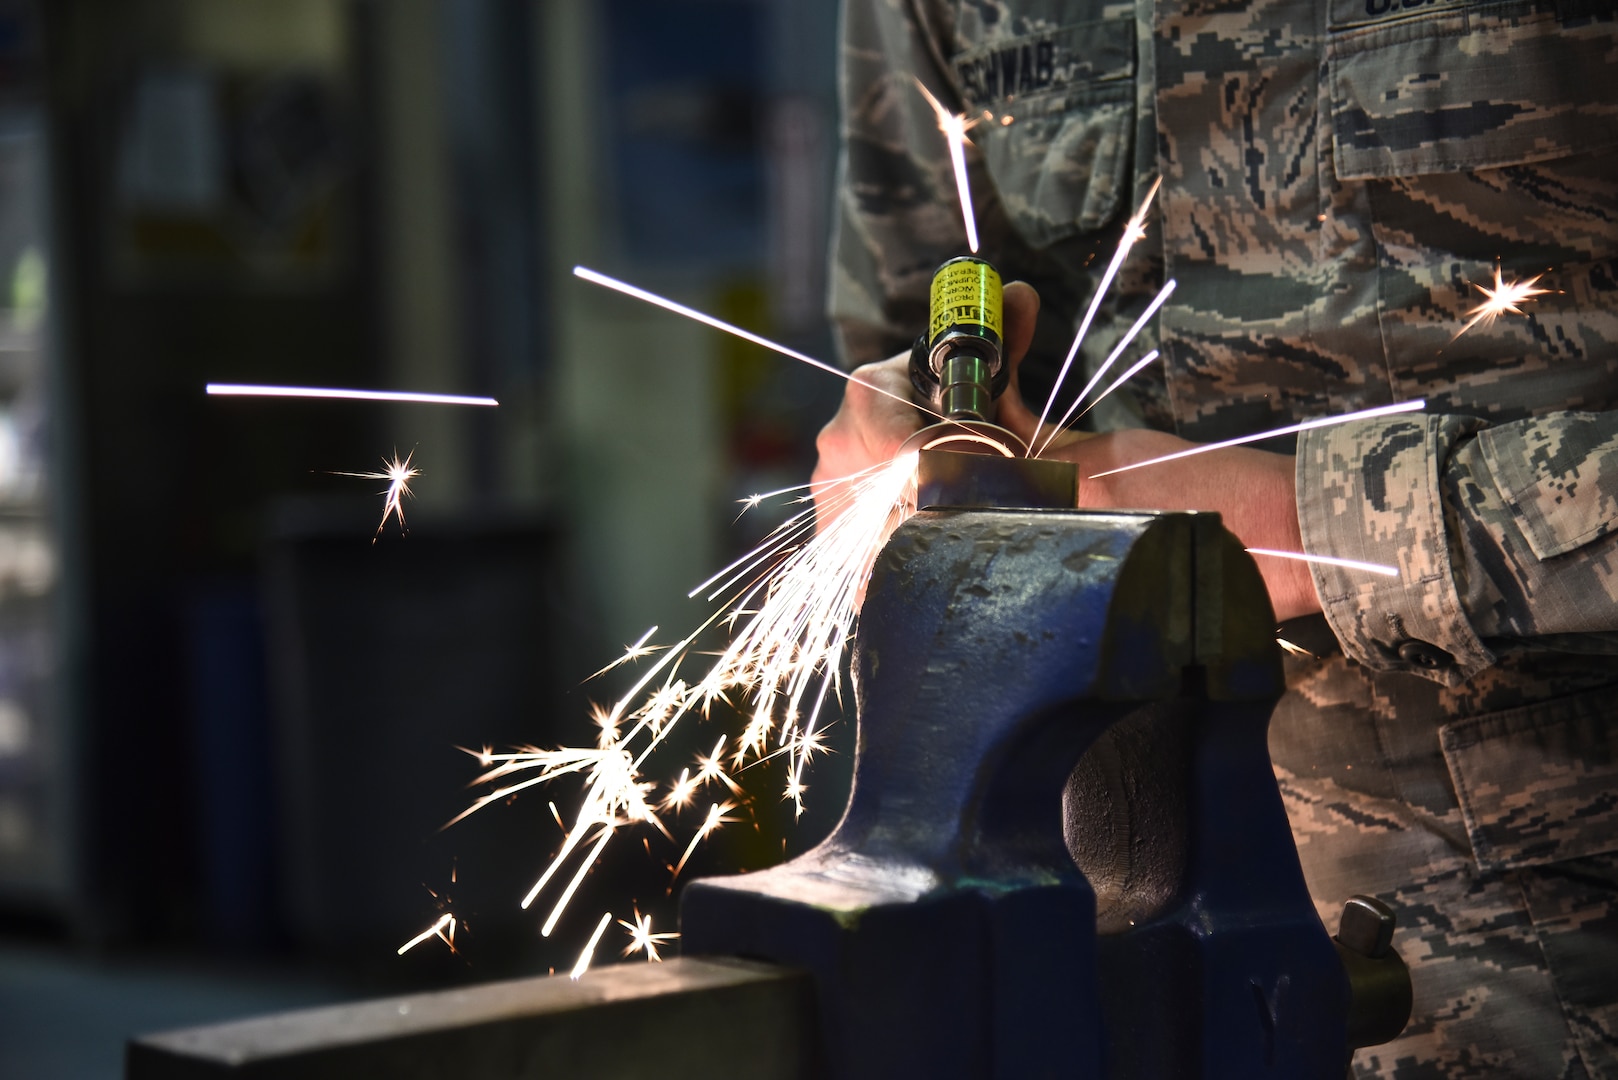 U.S. Air Force Senior Airman Steven Schwab, 380th Expeditionary Maintenance Squadron aircraft structural repair technician, cleaning up the edge of a titanium metal piece at Al Dhafra Air Base, United Arab Emirates, Dec. 9, 2018. The fabrication flight, also known as “fab flight” or the “American chopper of aircraft maintenance” is comprised of Sheet Metals, Non-Destructive Inspection and Aircraft Structural Repair technicians. (U.S. Air Force photo by Senior Airman Mya M. Crosby)